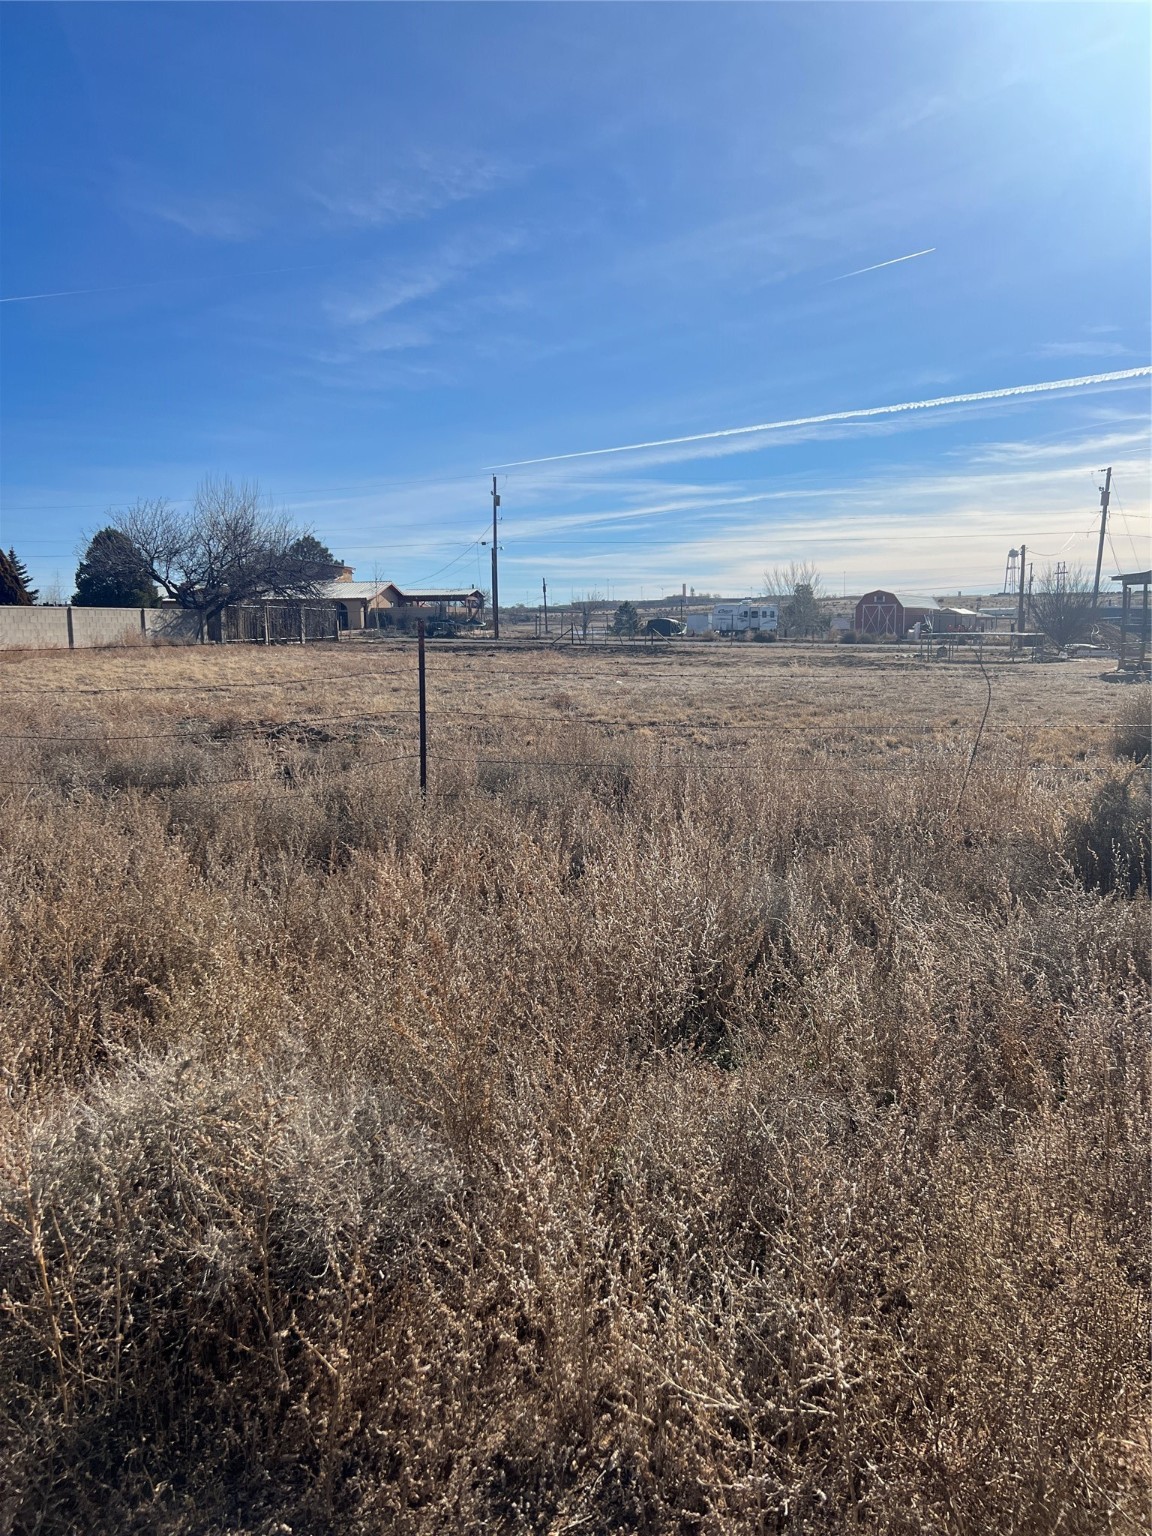 25 Emily Road, Santa Fe, New Mexico 87508, ,Land,For Sale,25 Emily Road,202234282